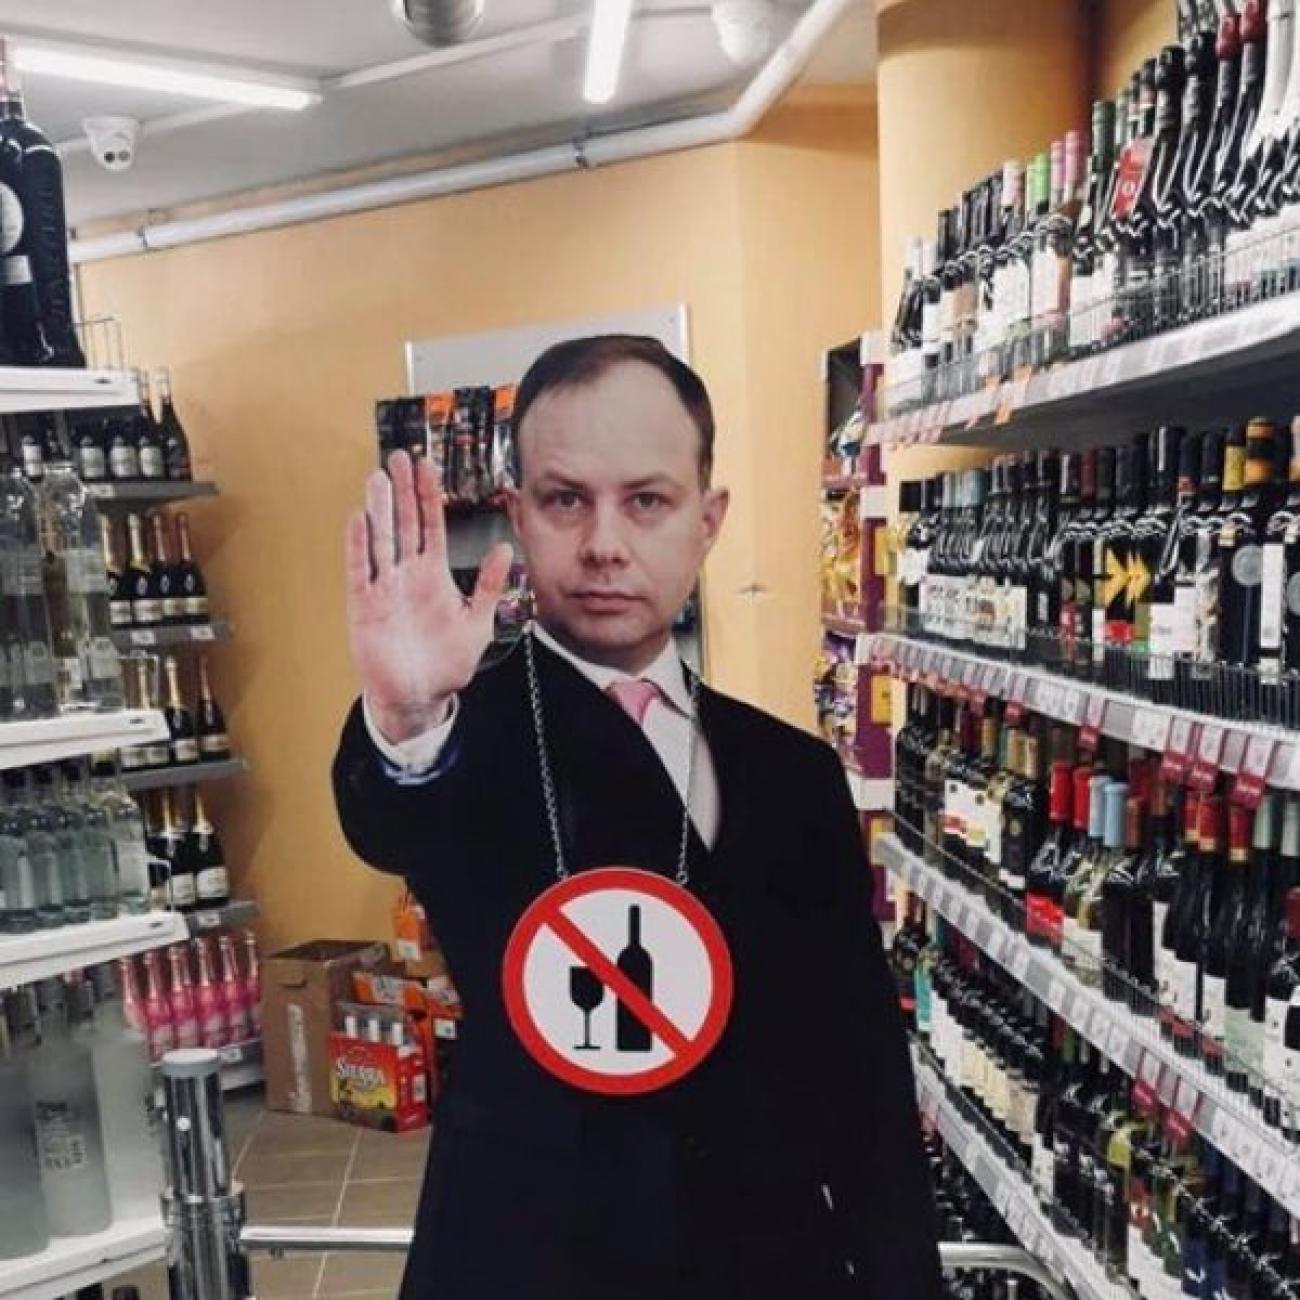 A life-size cutot of Professor Aurejus Veryga is used to block the path to buying alcohol in a supermarket during hours when alcohol sales are prohibited, in Lithuania, on January 7, 2019..​